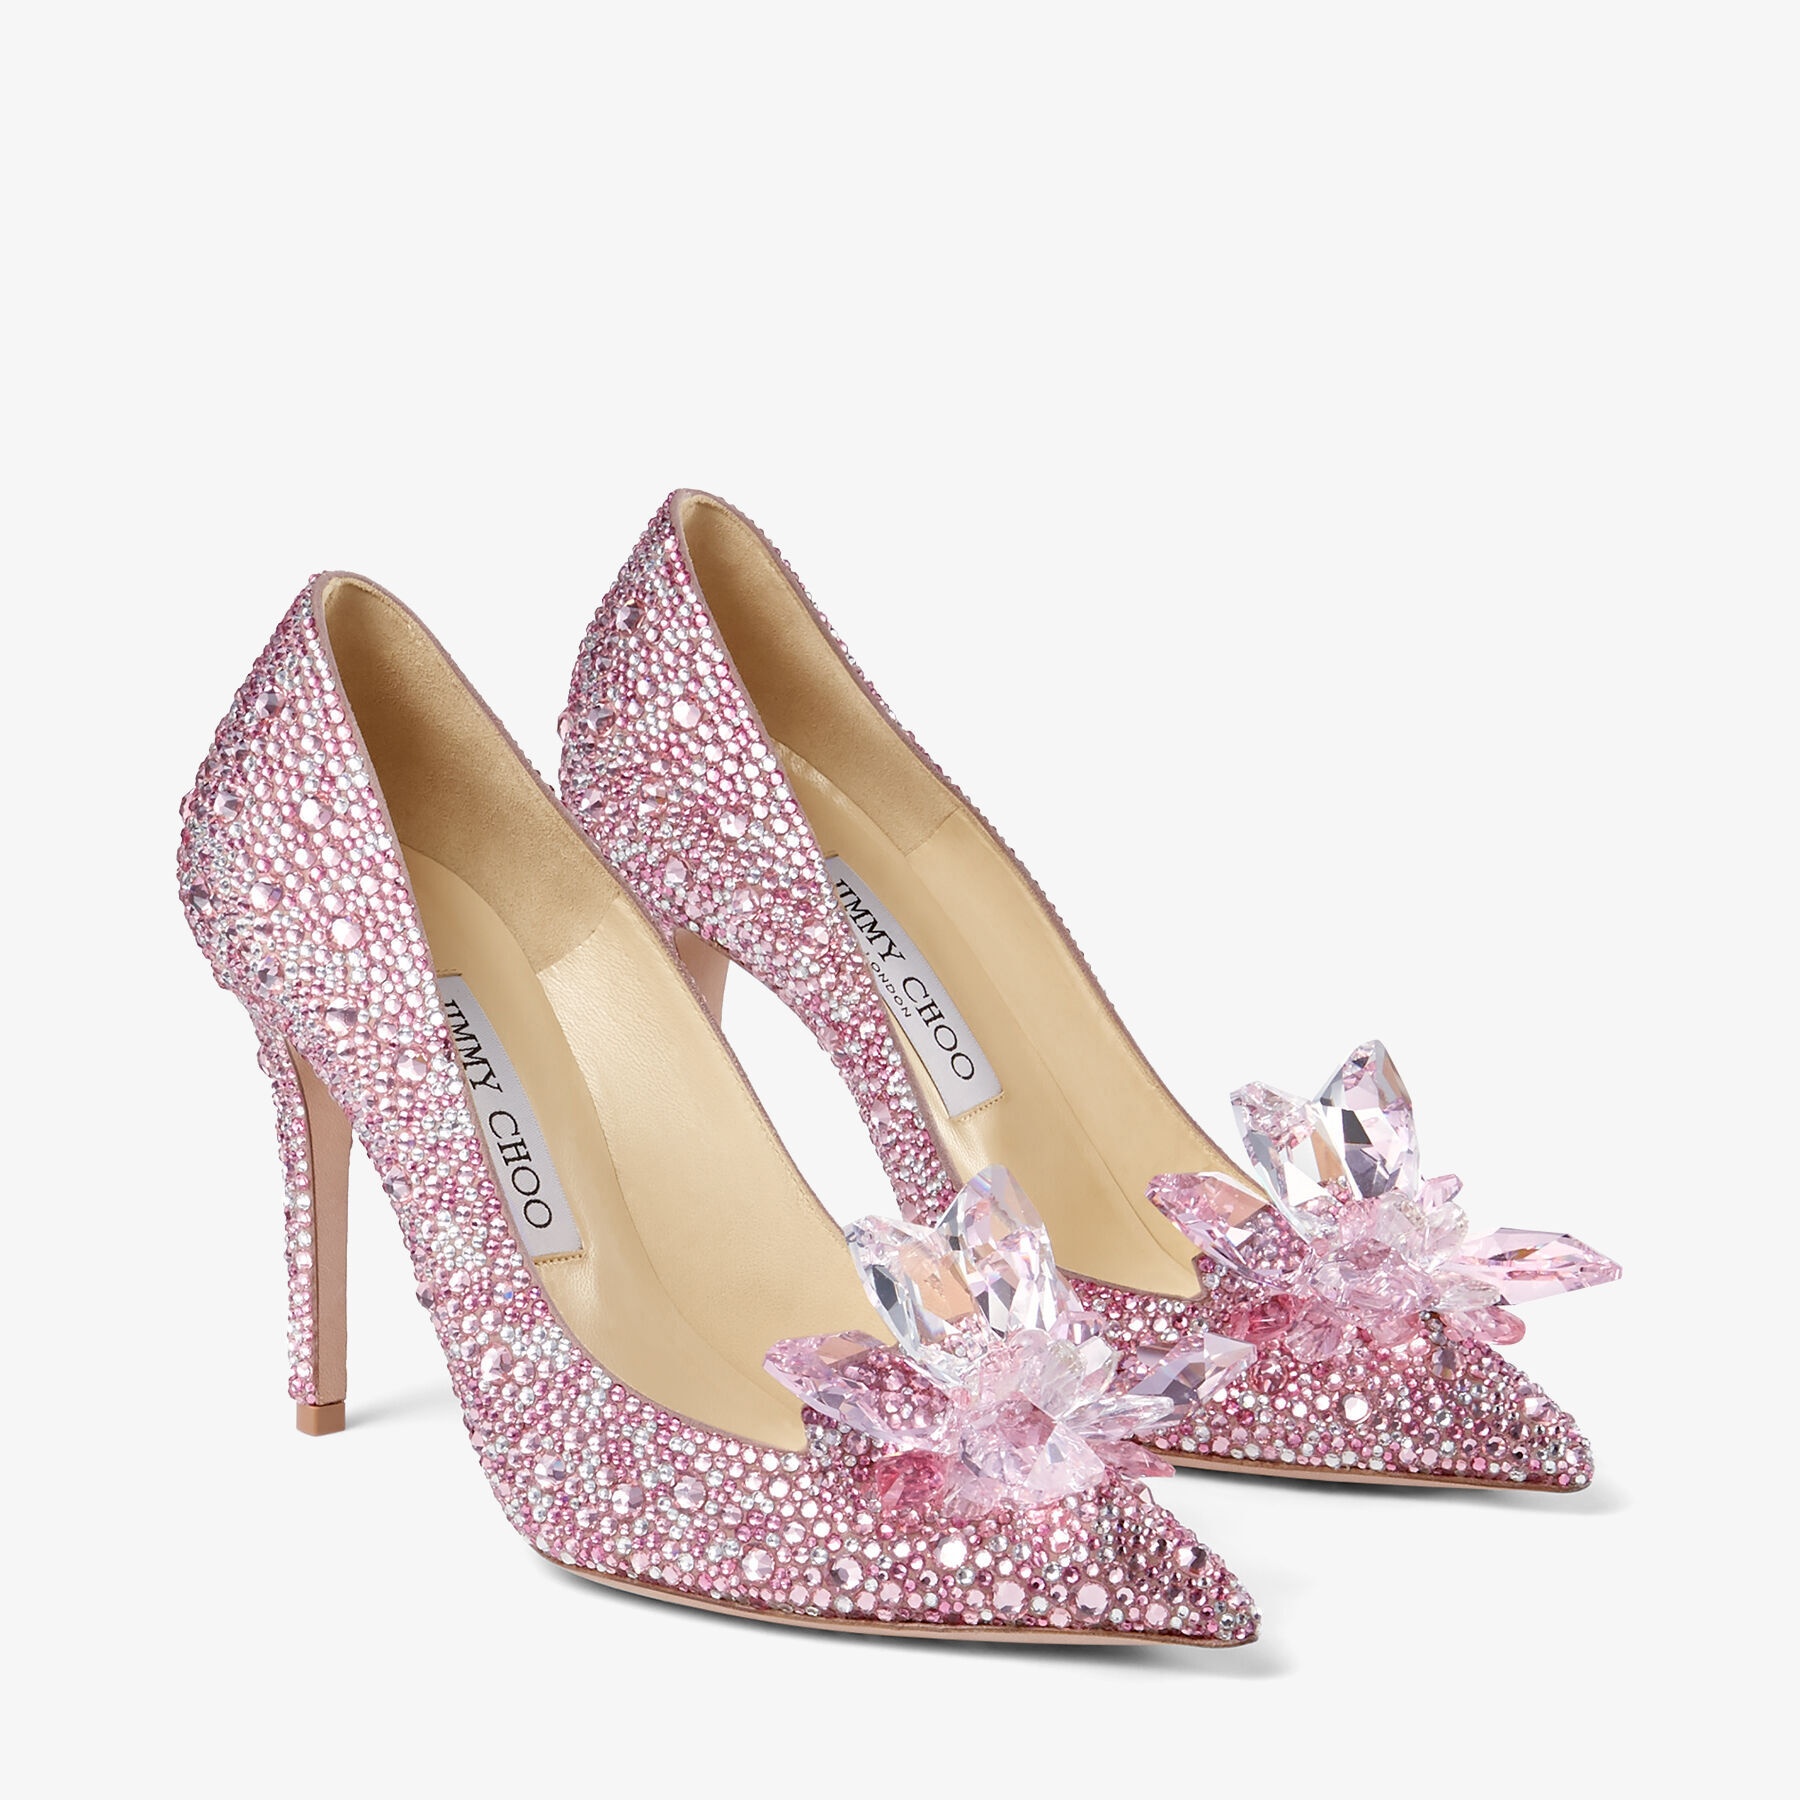 Avril
Rose Mix Suede and Crystal Covered Pointy Toe Pumps - 2